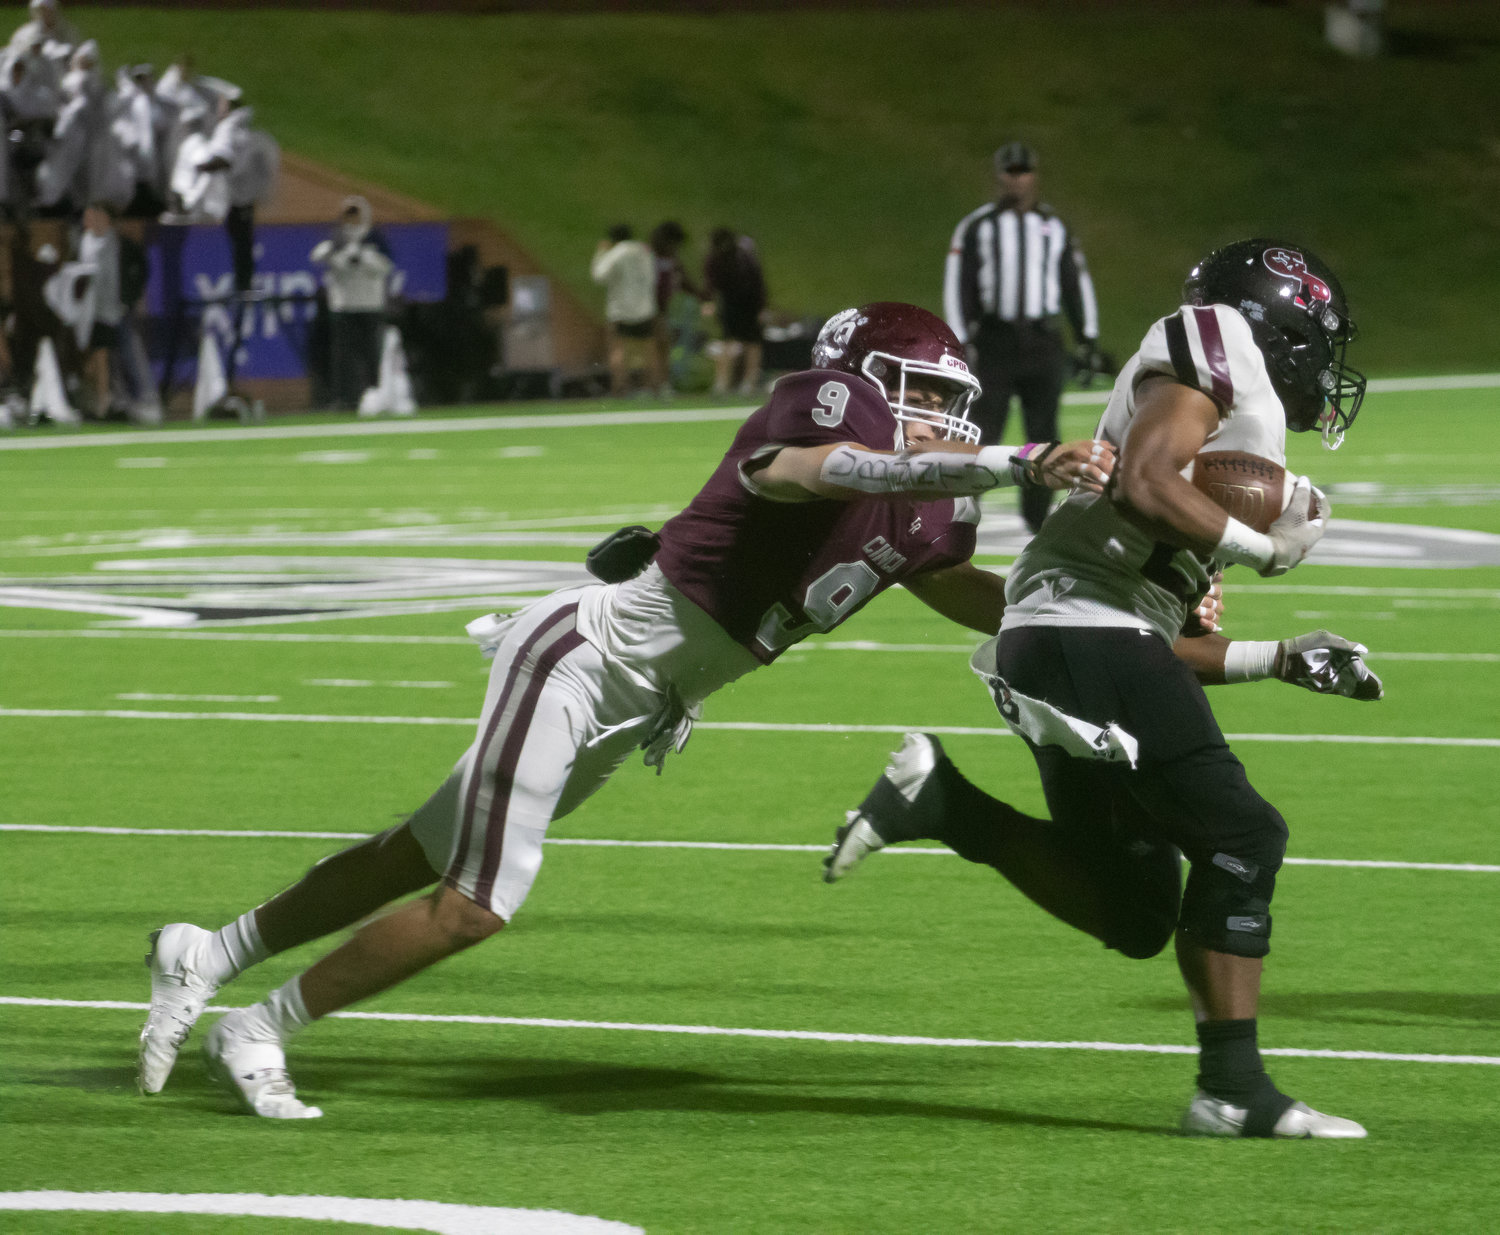 Yetxiel Perez-Gilbes makes a tackle during Friday's game between Cinco Ranch and George Ranch at Rhodes Stadium.